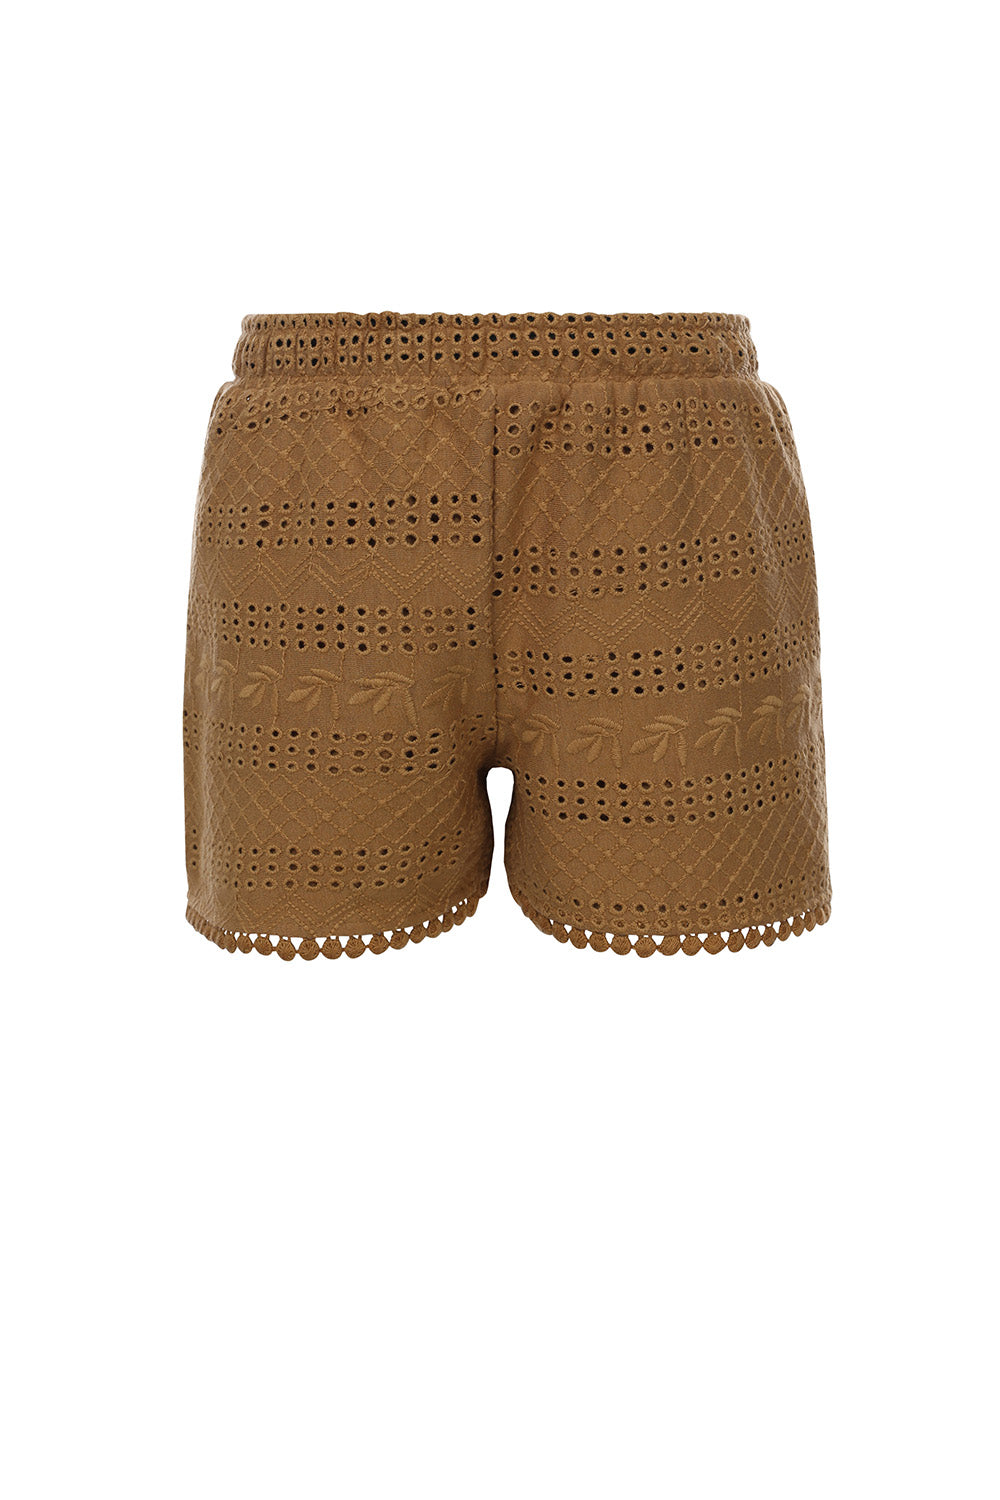 LOOXS Little Broidery Shorts